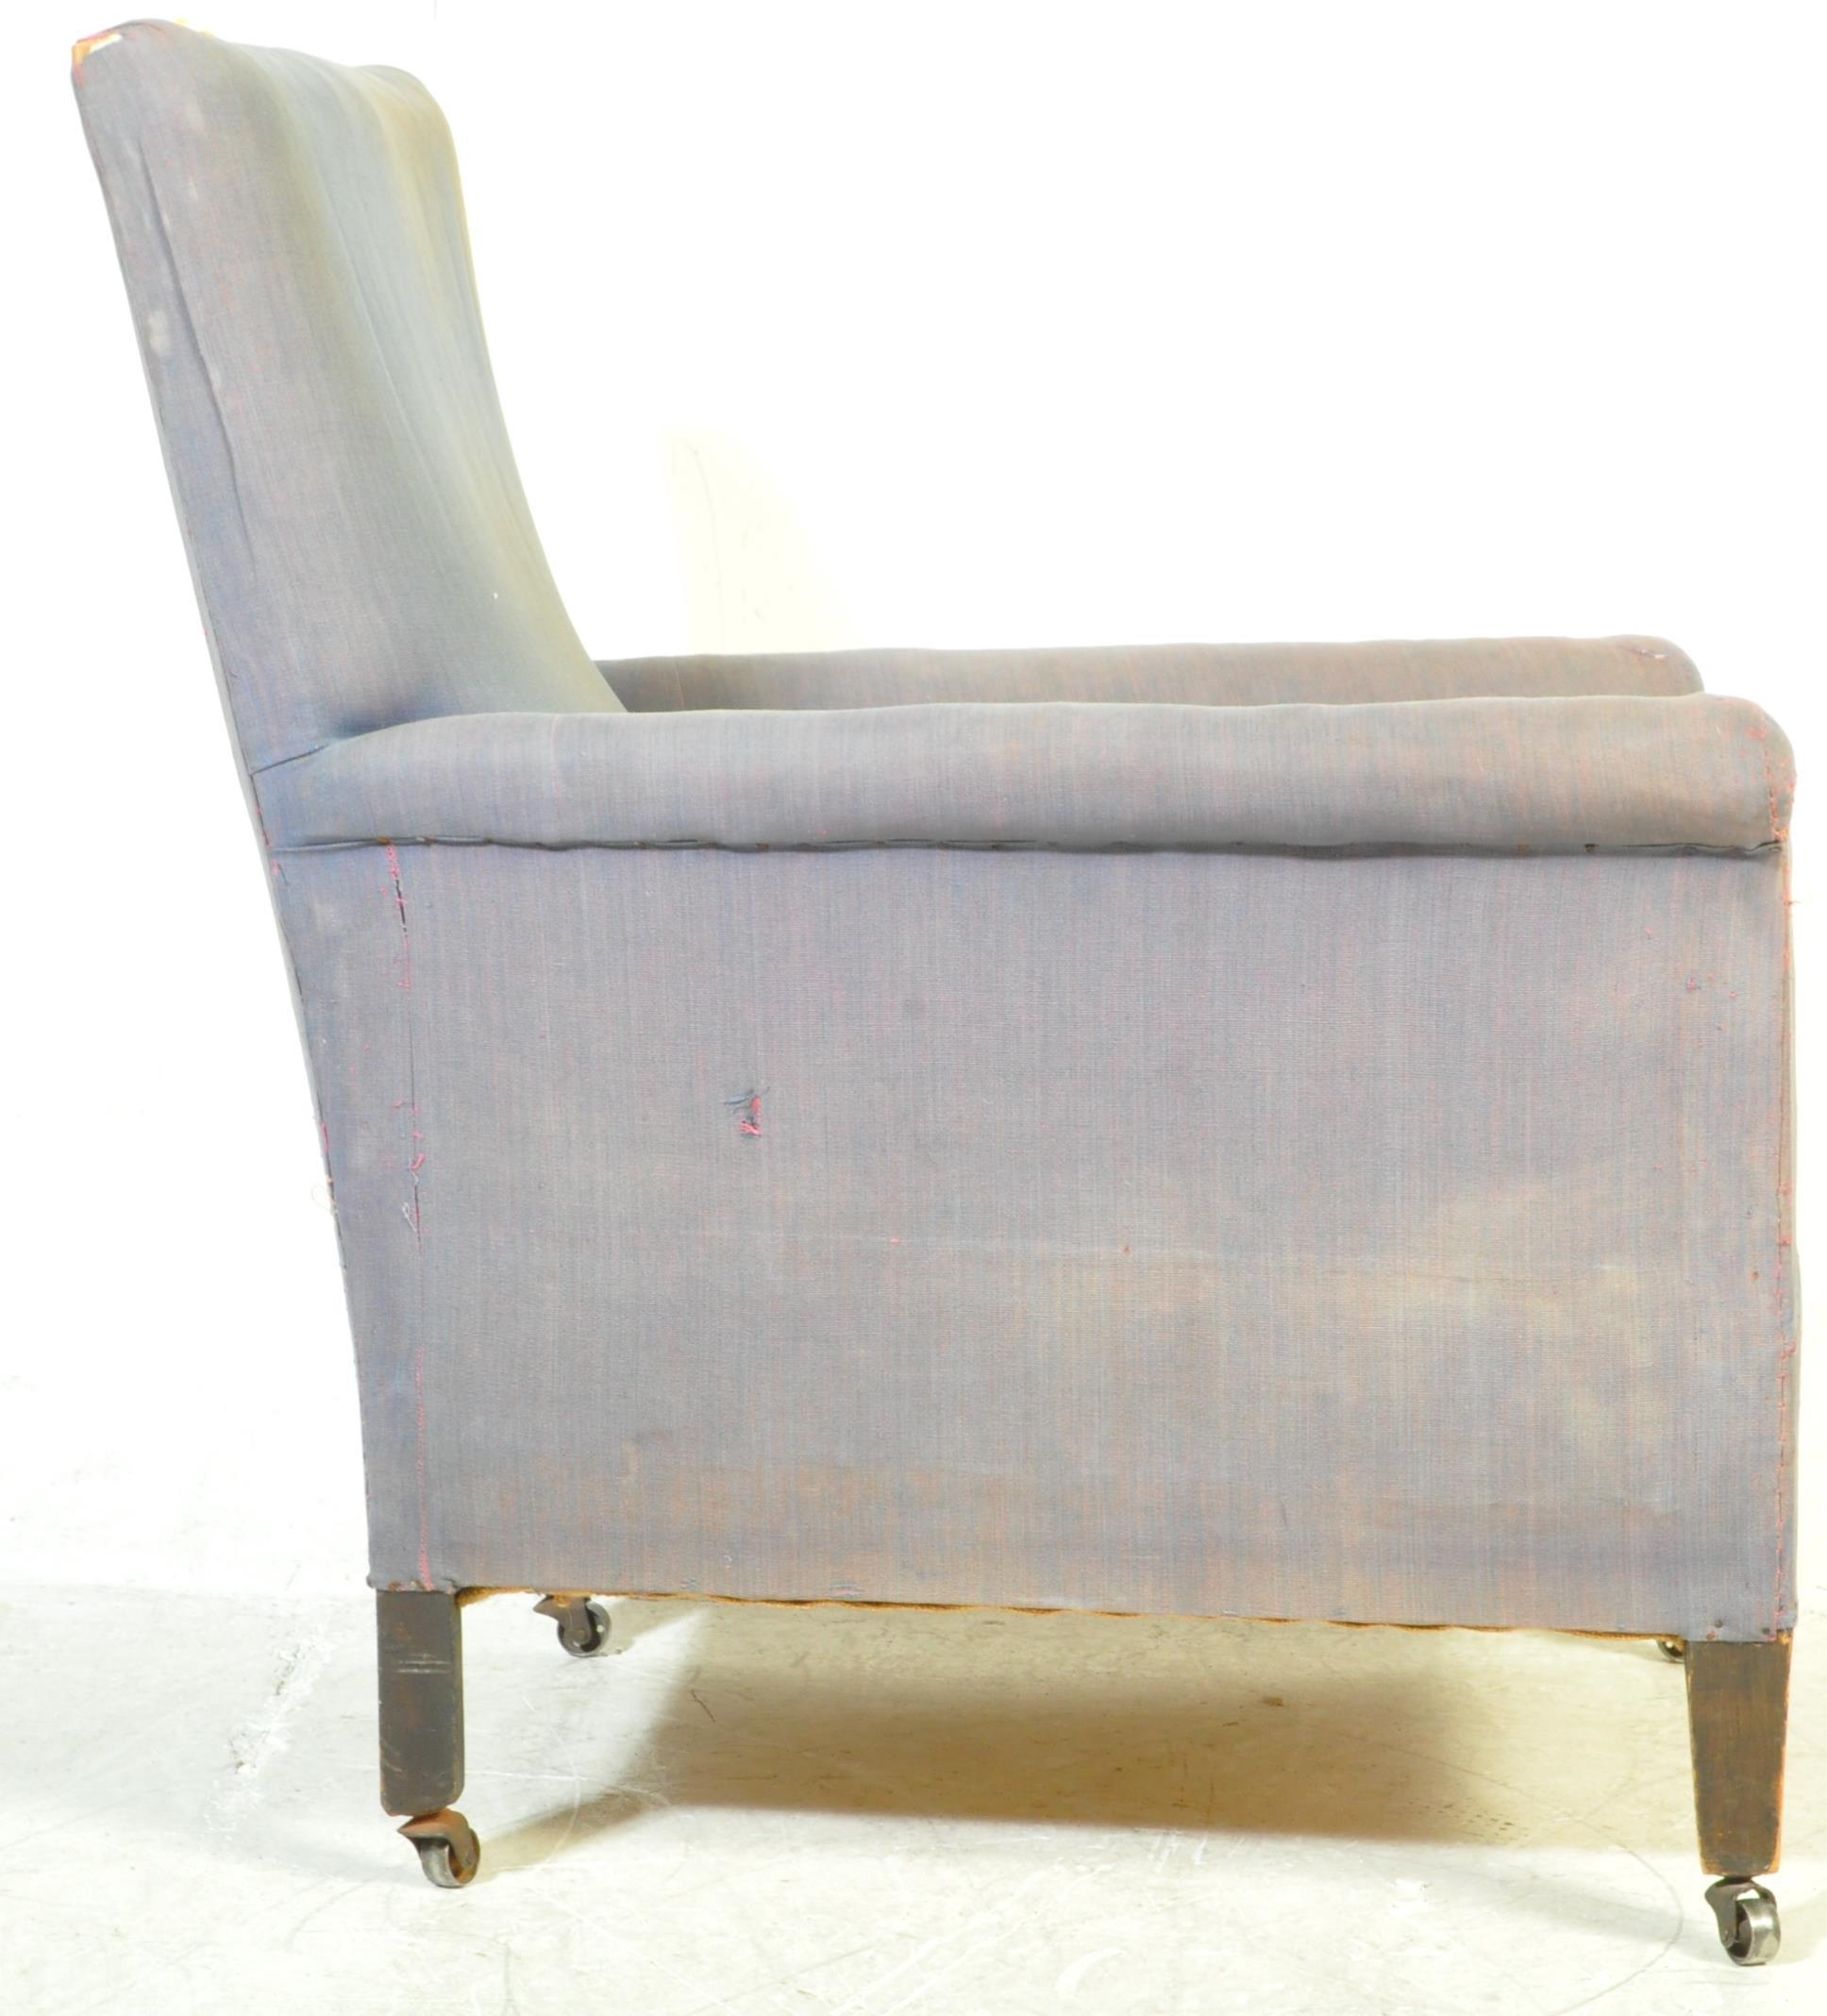 20TH CENTURY ART DECO MANNER FIRESIDE CLUB CHAIR - Image 4 of 5